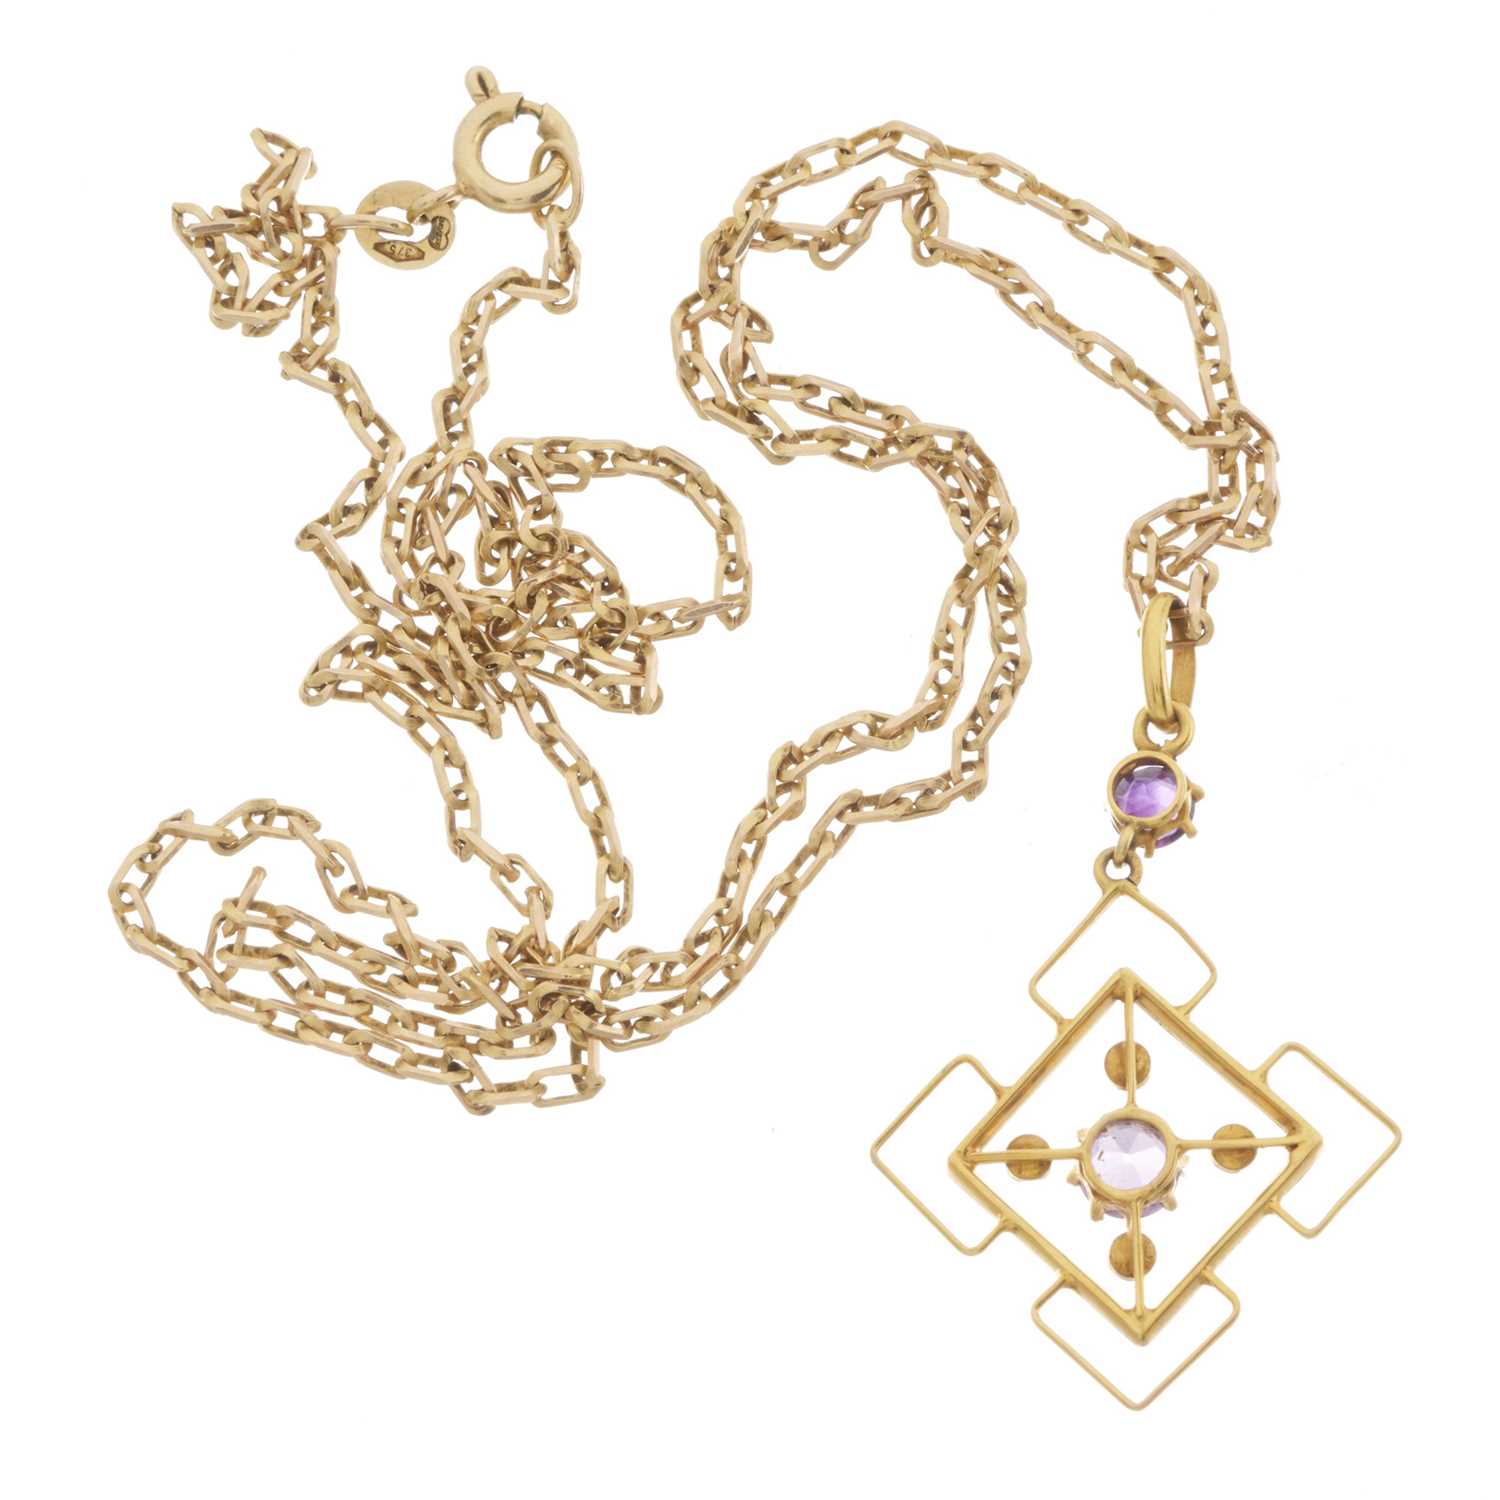 An early 20th century 9ct gold amethyst and pearl pendant, with chain - Image 2 of 2